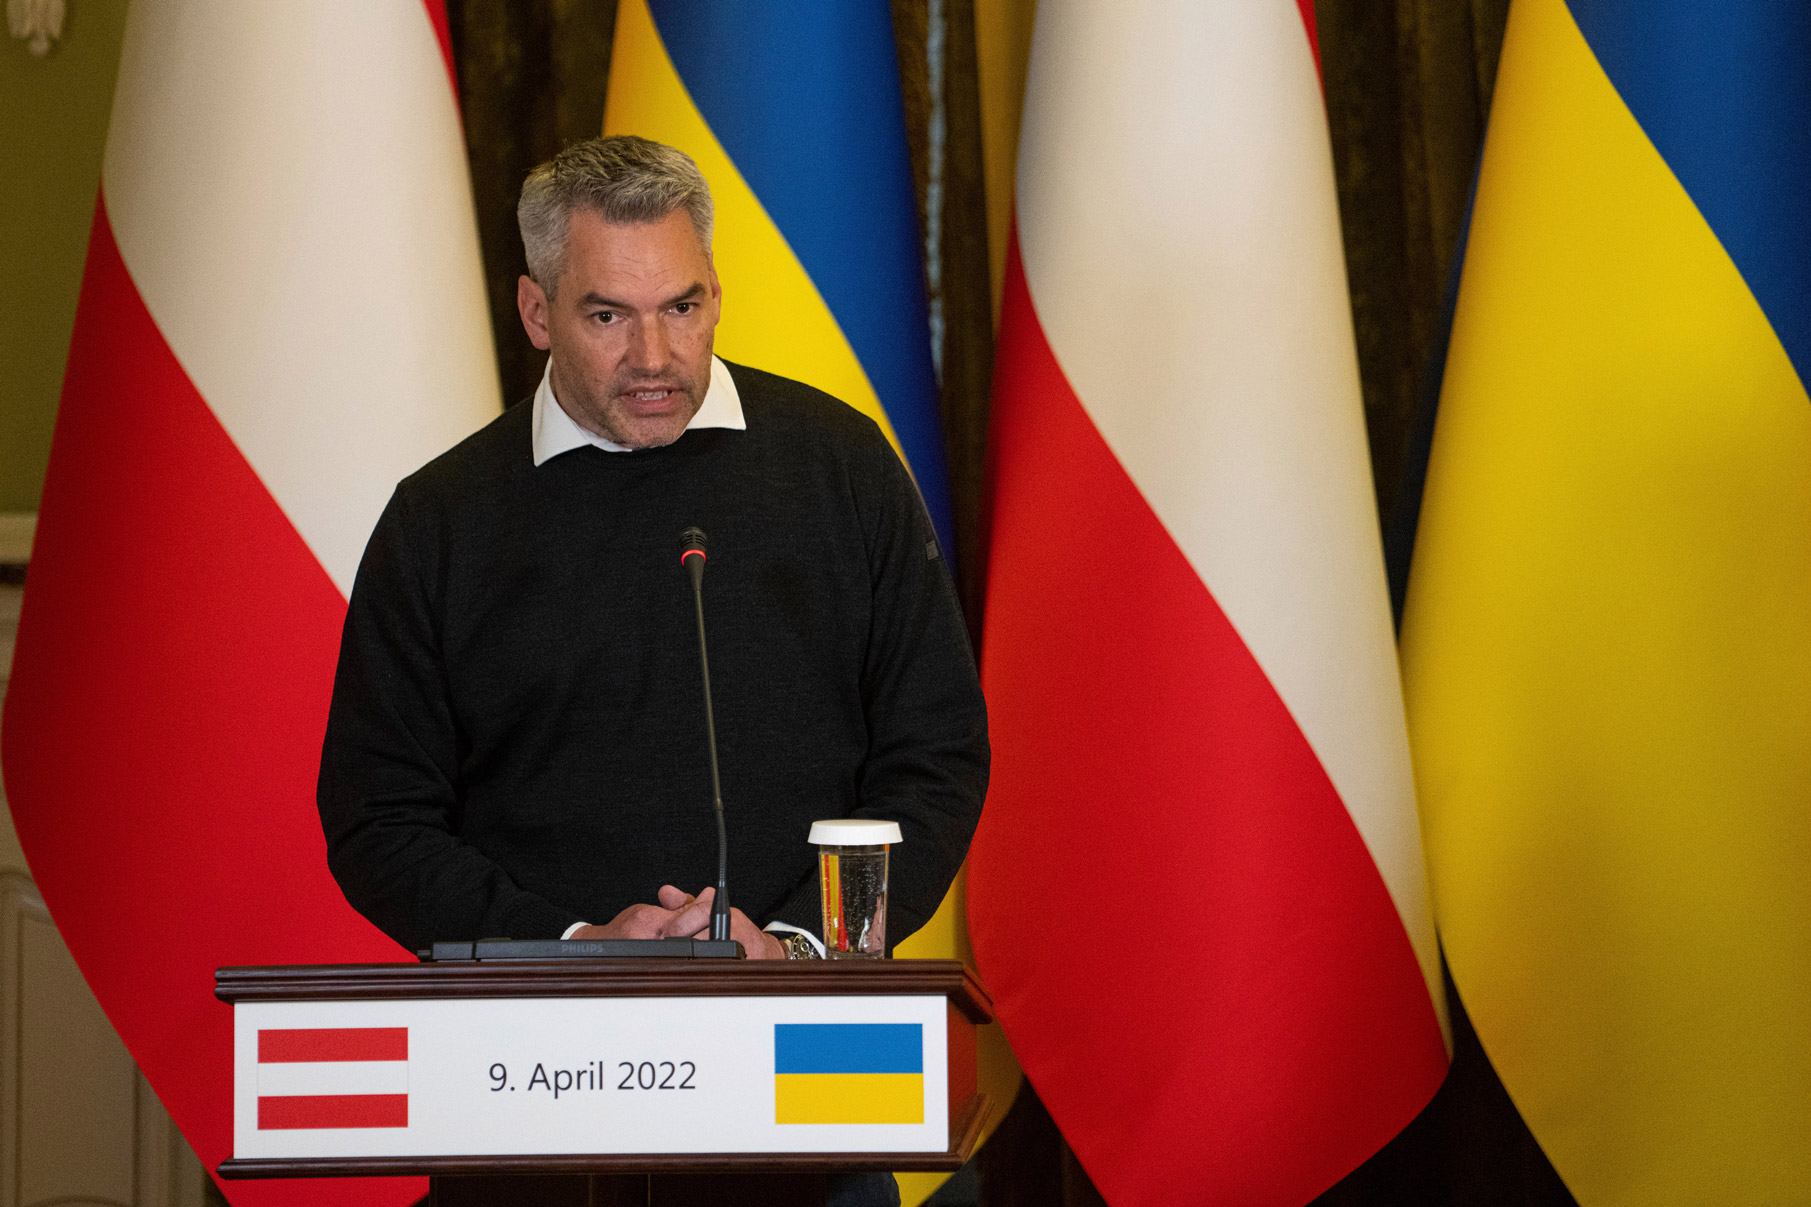 Austria's Chancellor Karl Nehammer talks during a news conference with Ukrainian President Volodymyr Zelenskyy in Kyiv, on Saturday.